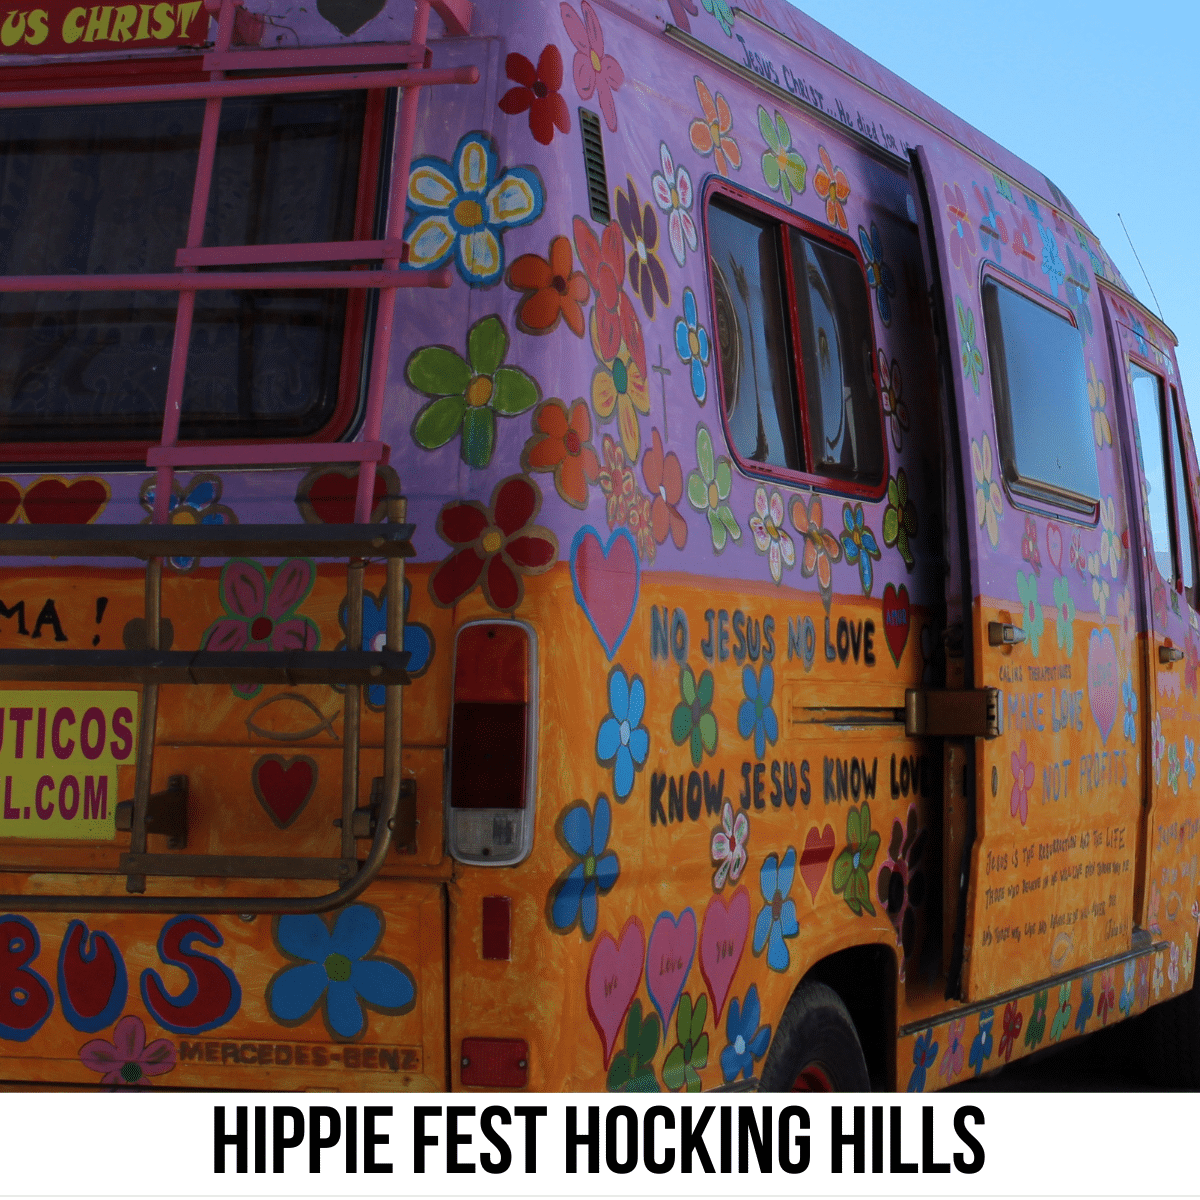 A square image of a photo of a VW bus with handpainted flowers, hearts, and other designs reminescent of the 1970s and Hippie Culture. A white strip across the bottom has text Hippie Fest Hocking Hills.